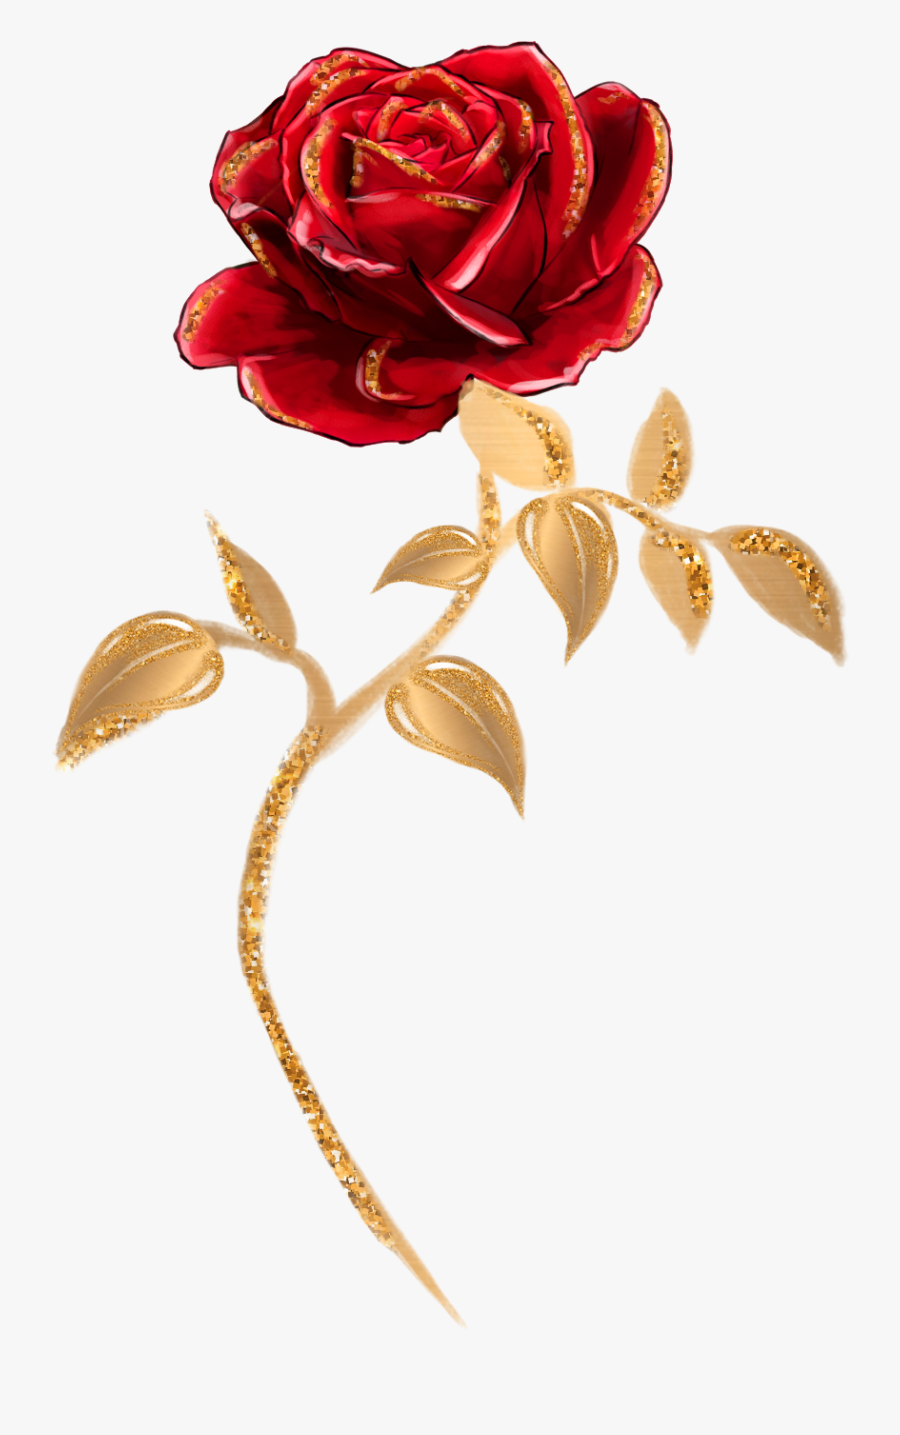 Beauty And The Beast Rose Png - Beauty And The Beast Png, Transparent Clipart